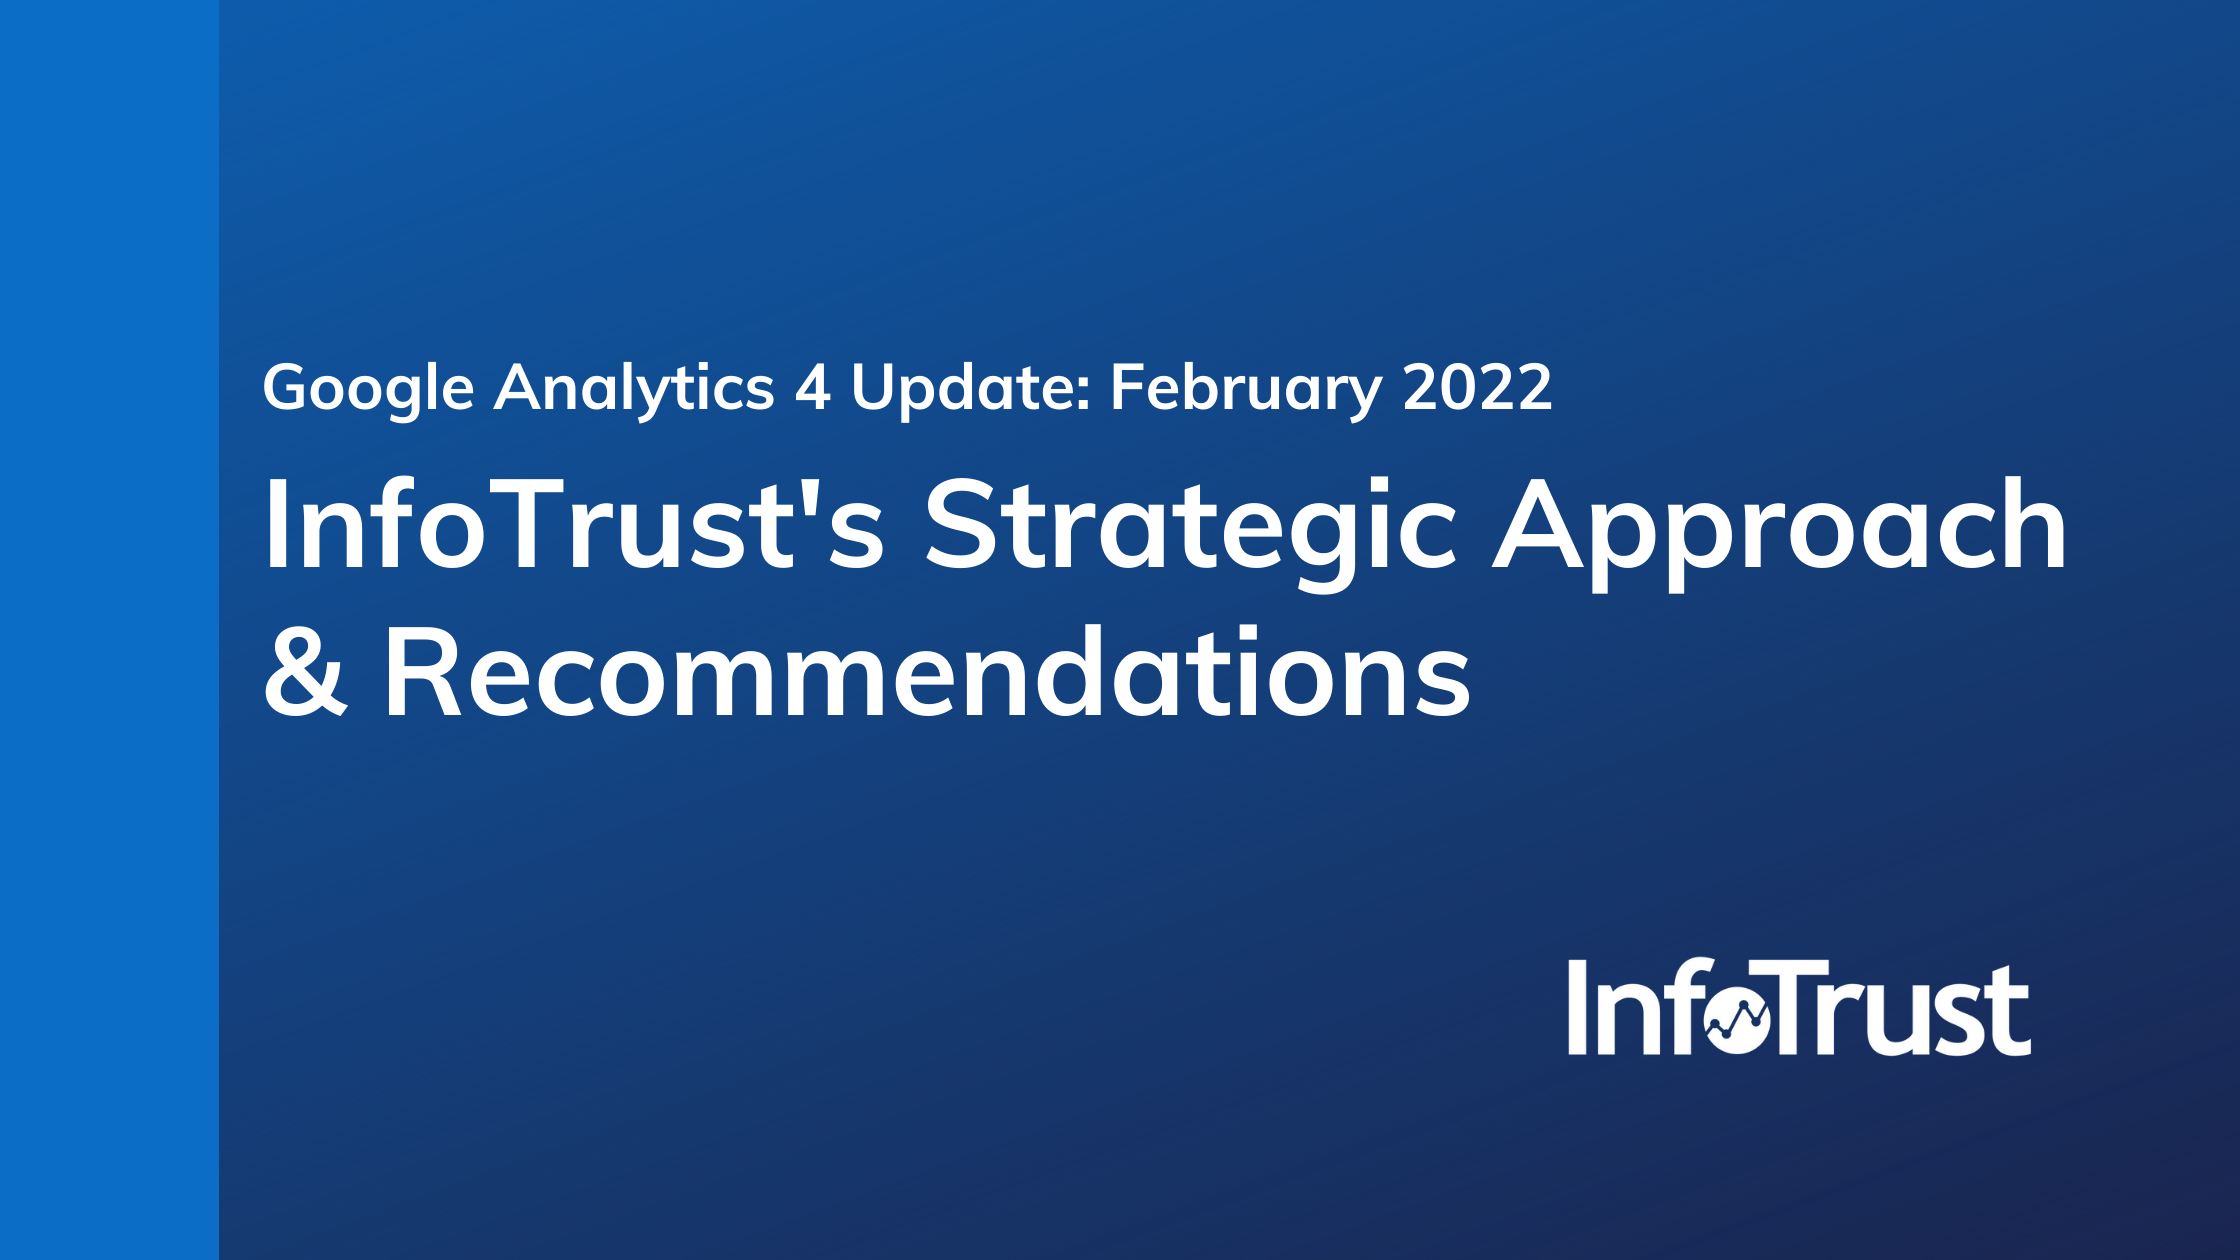 Google Analytics 4 Update: February 2022 – InfoTrust’s Strategic Approach & Recommendations